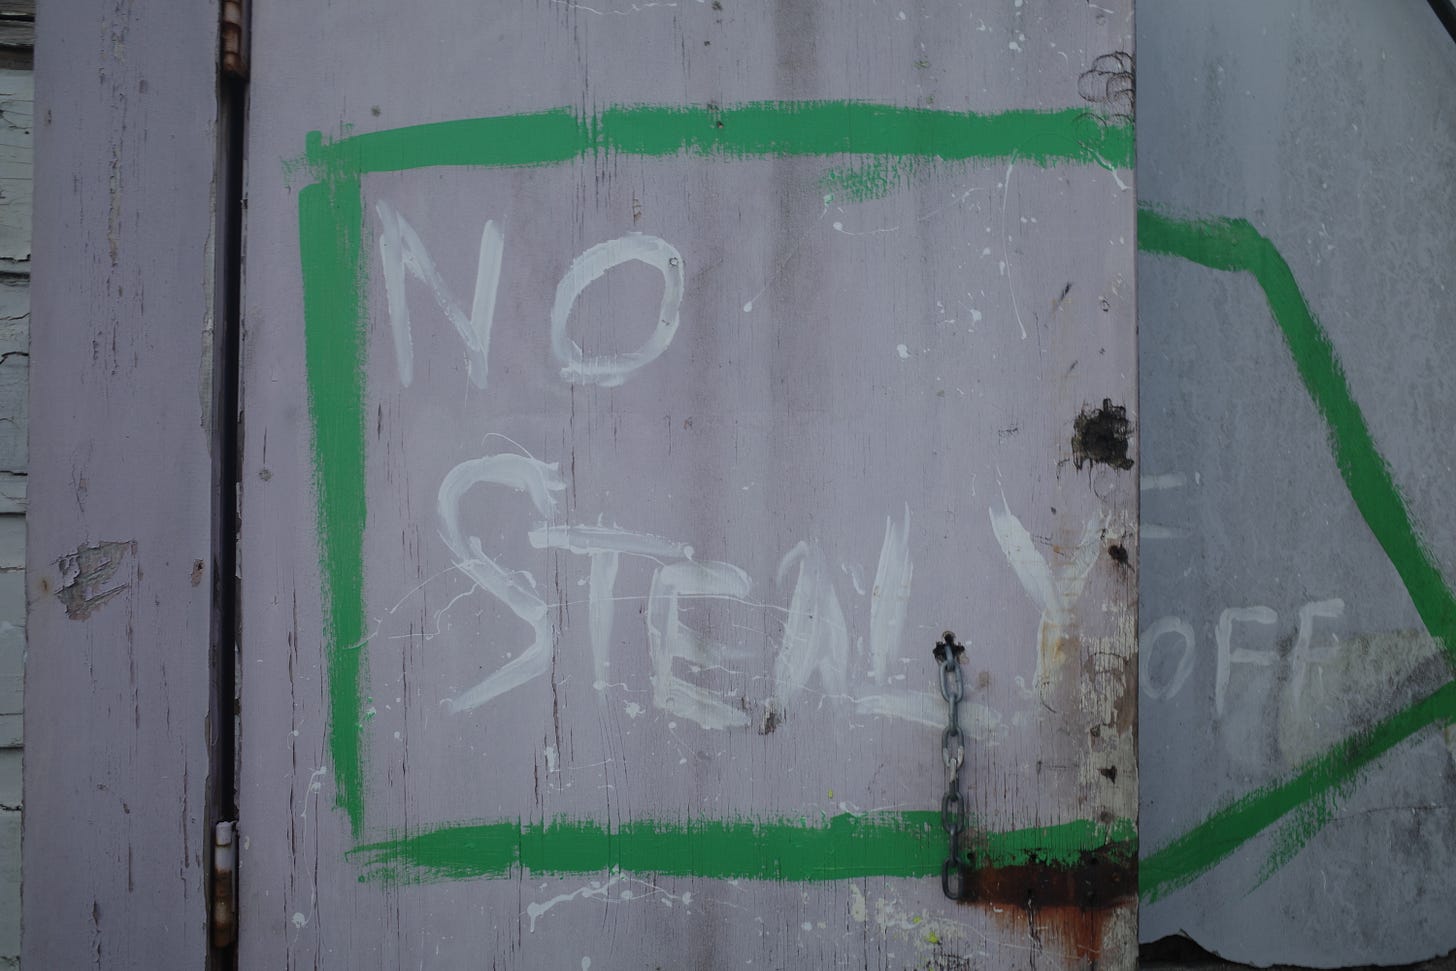 A handpainted sign that says "No stealy F off"